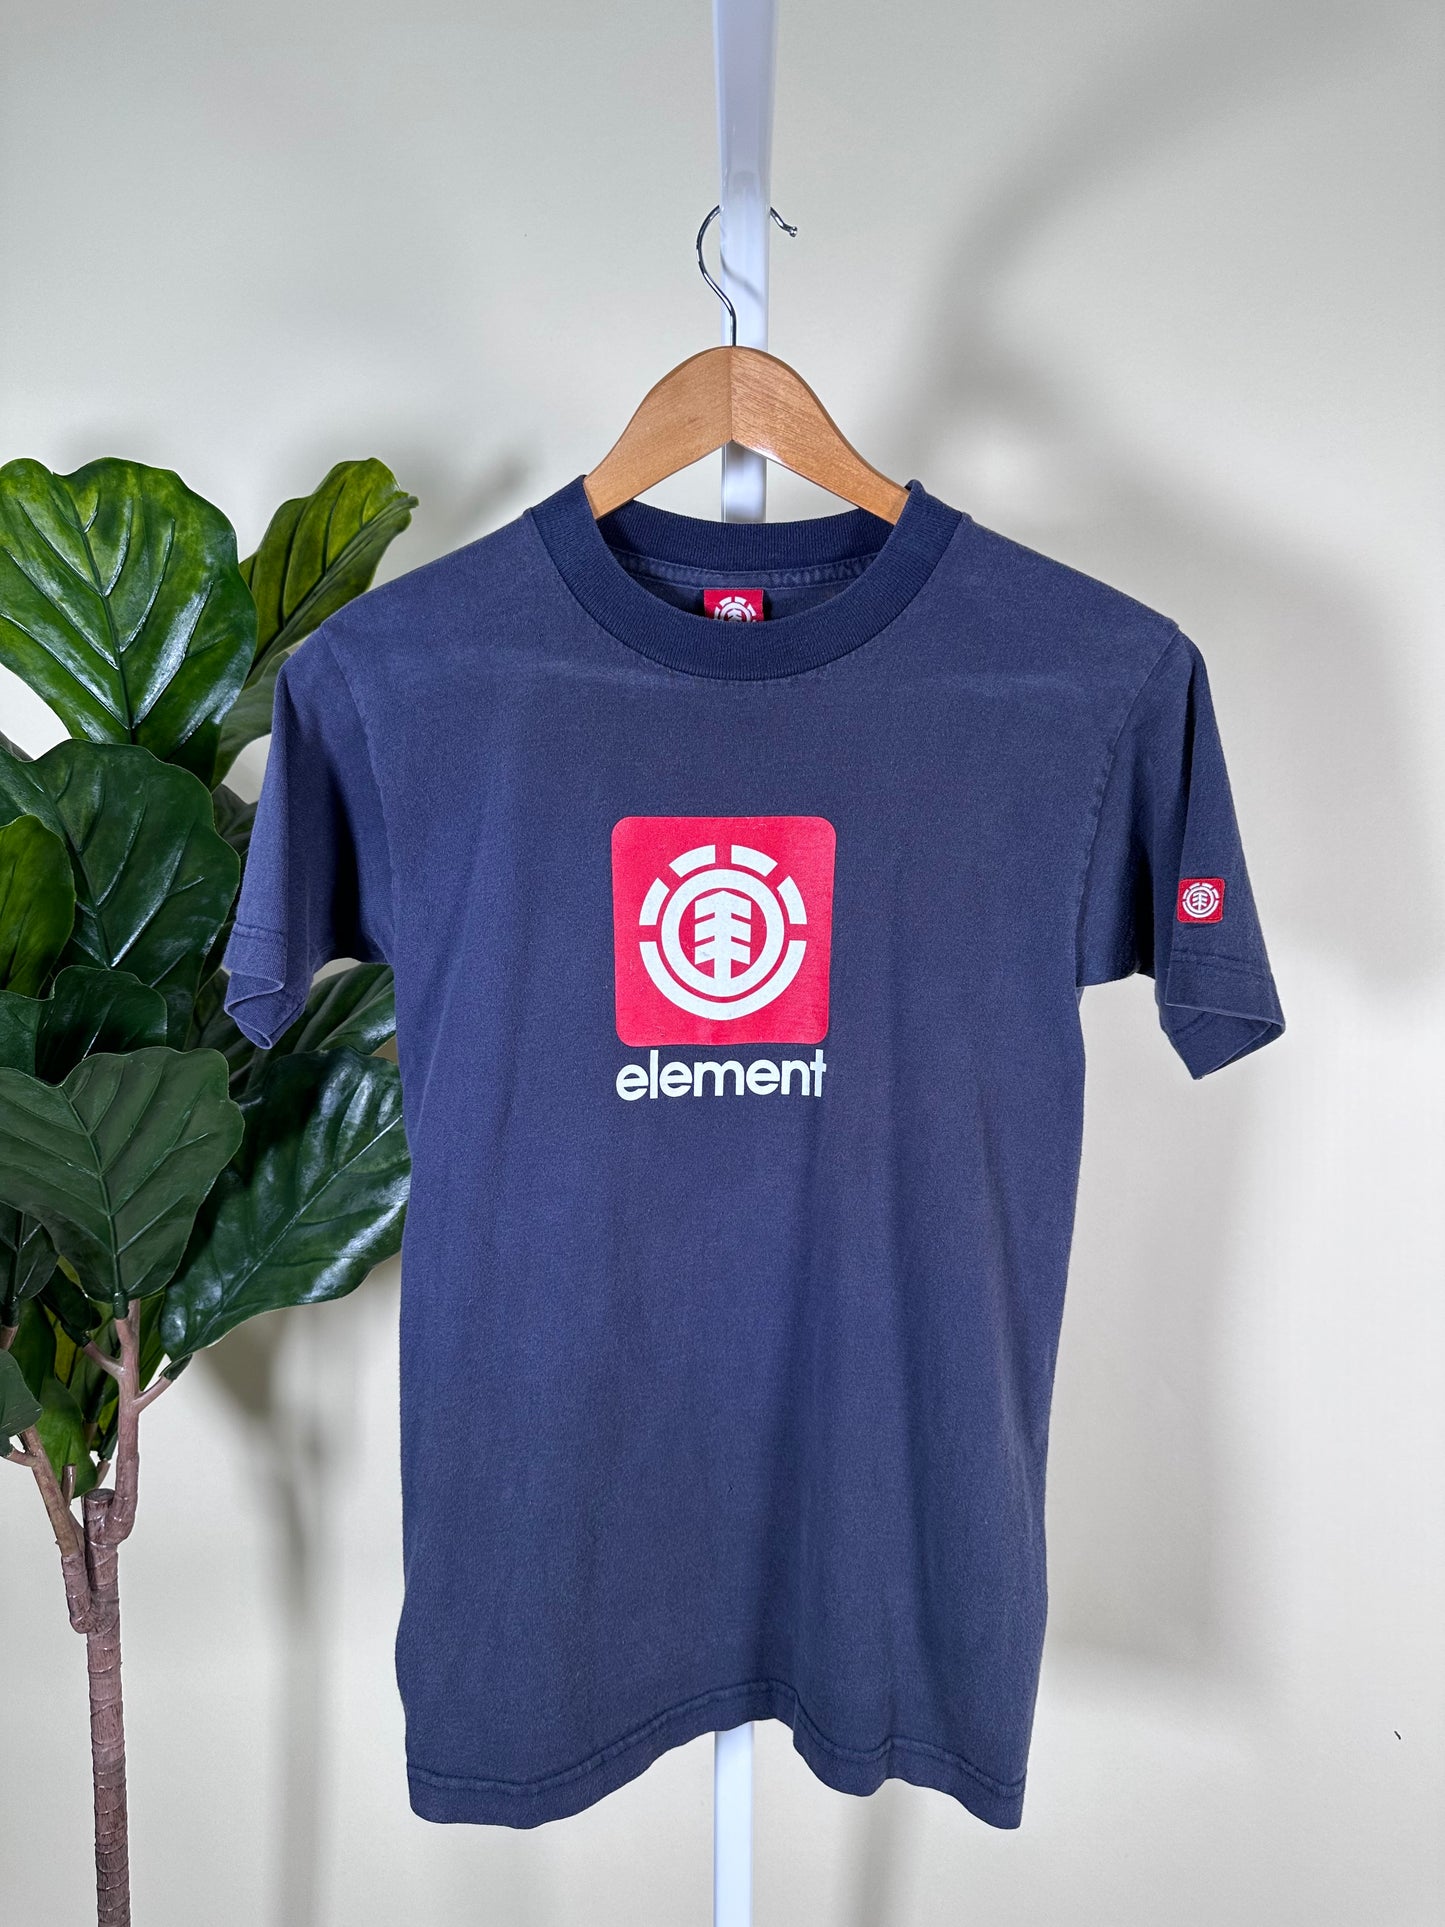 Element Tee (Small)